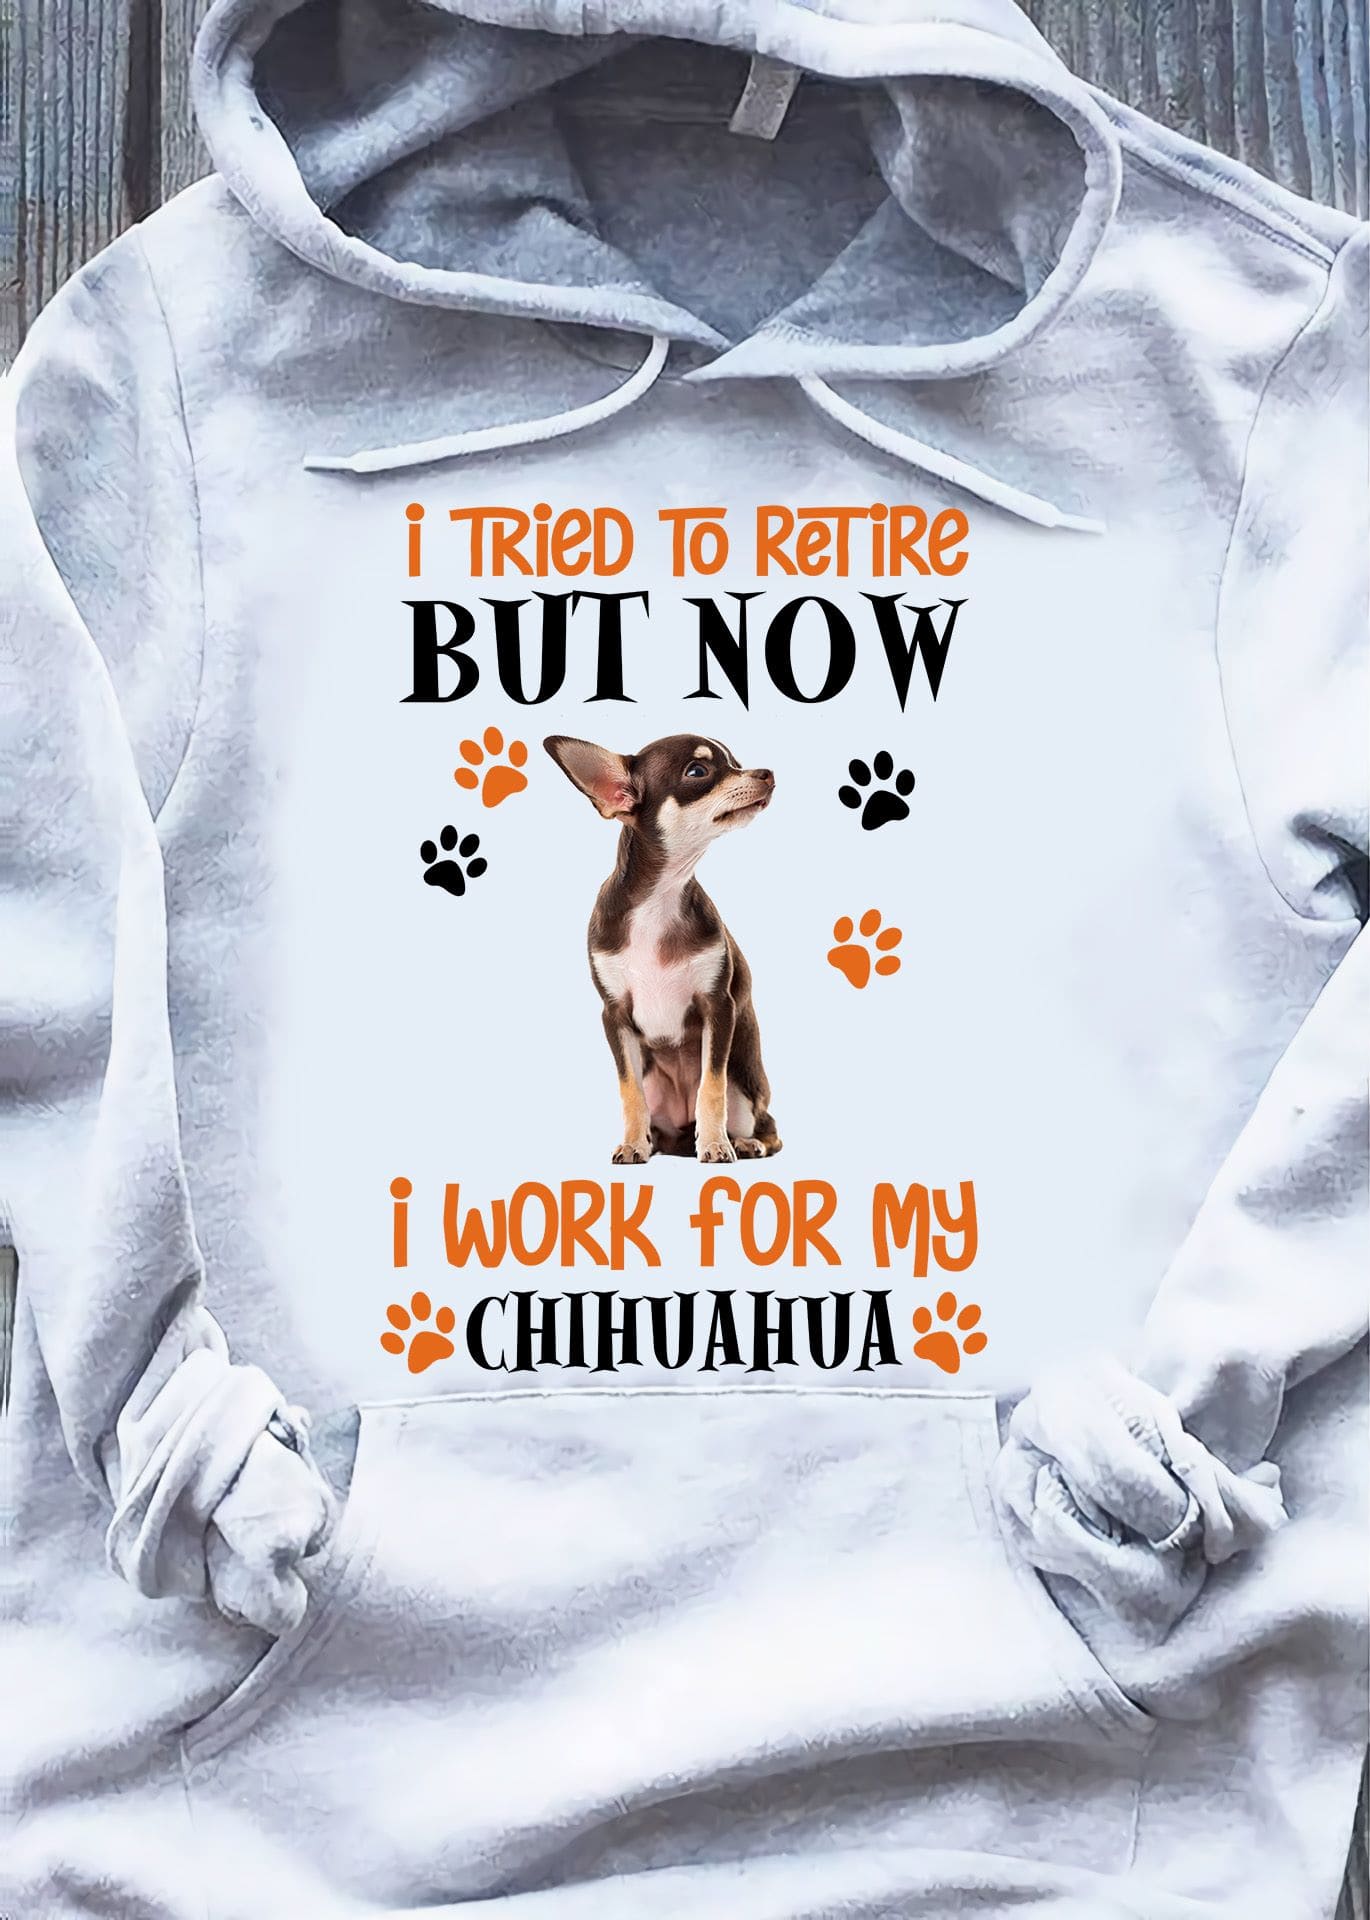 Chihuahua Graphic T-shirt - I tried to retire but now i work for chihuahua